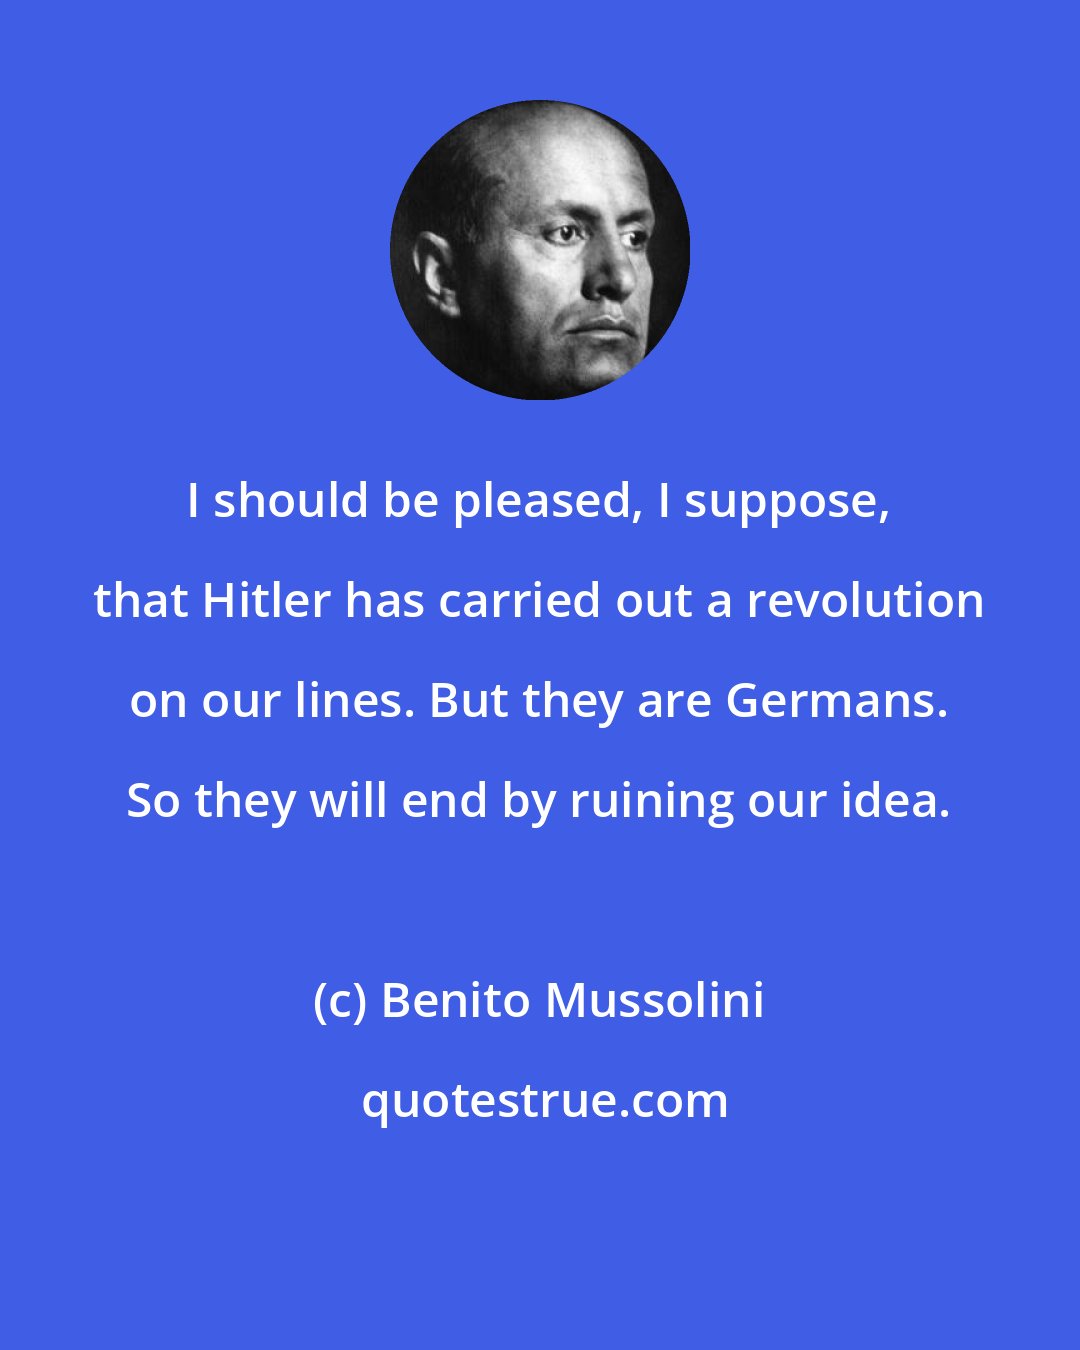 Benito Mussolini: I should be pleased, I suppose, that Hitler has carried out a revolution on our lines. But they are Germans. So they will end by ruining our idea.